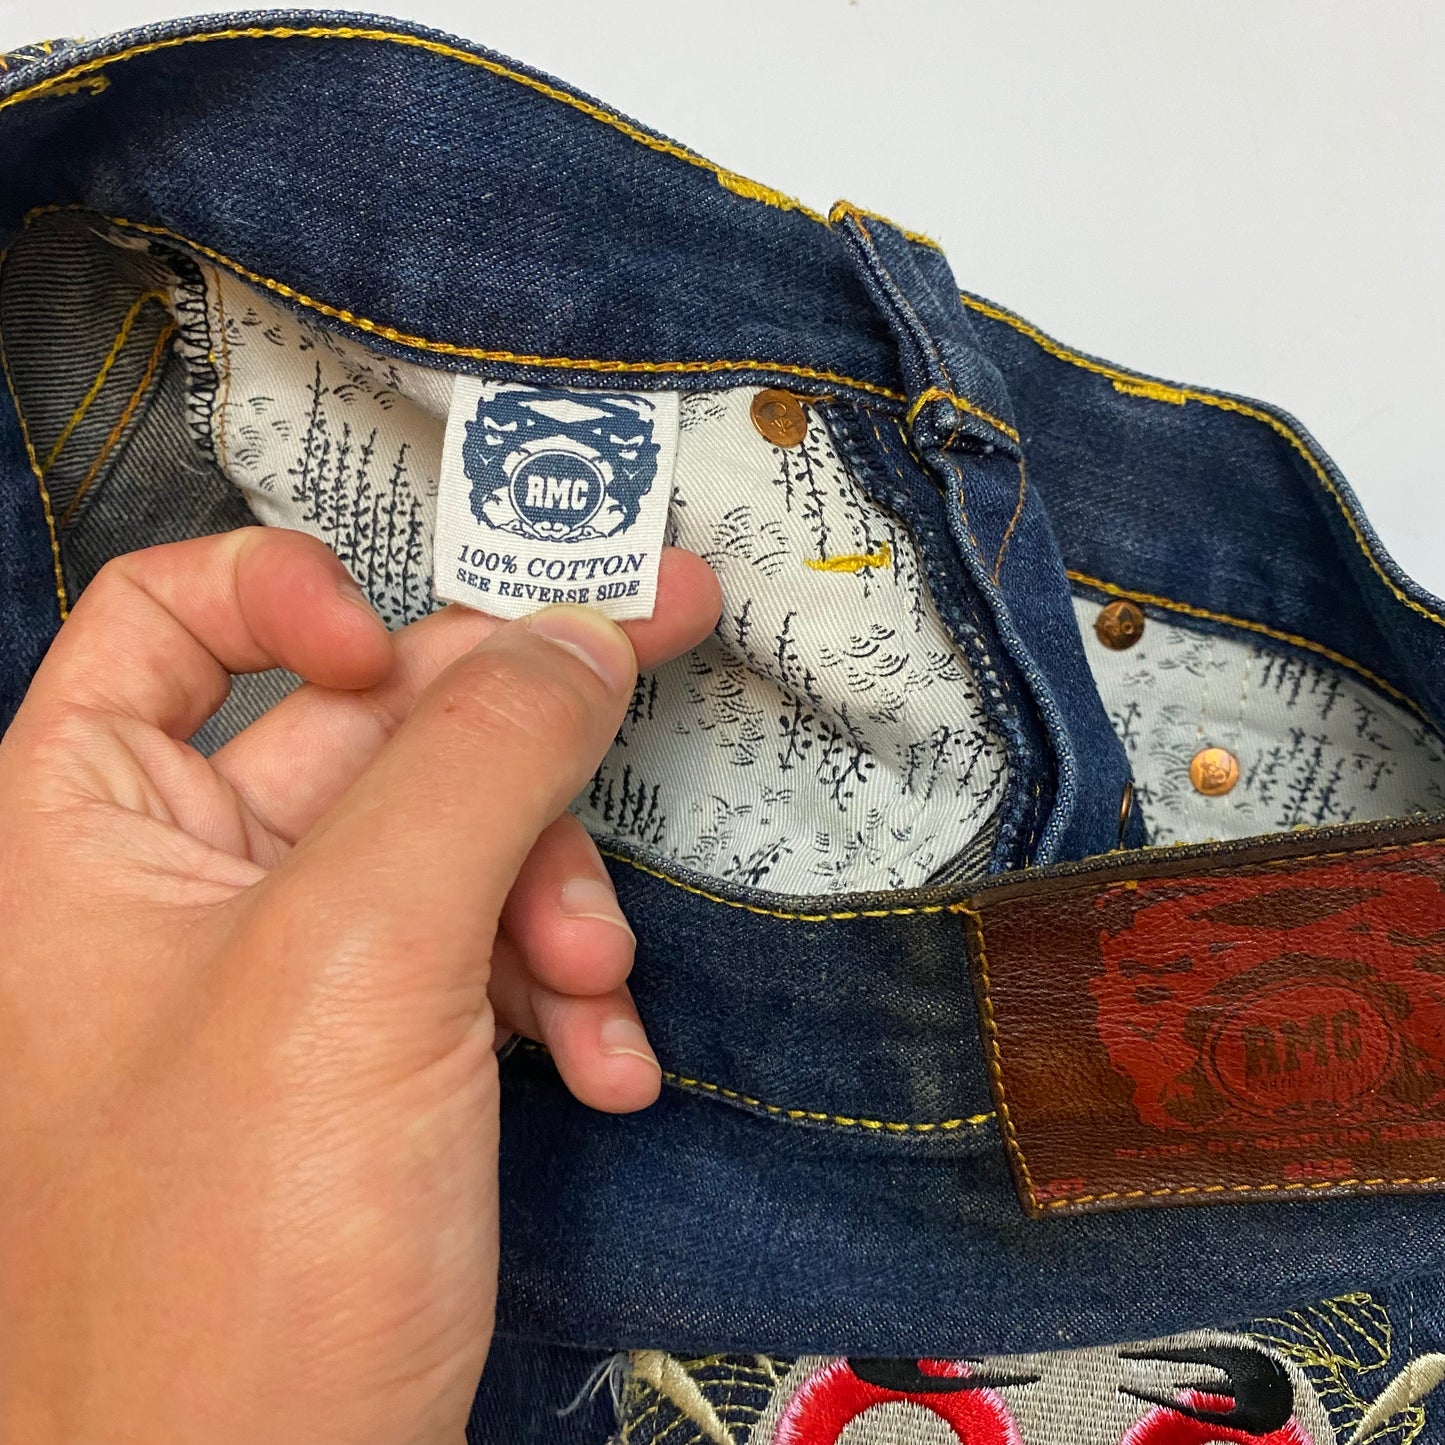 RMC 00’s Embroidered Denim Jeans - w28